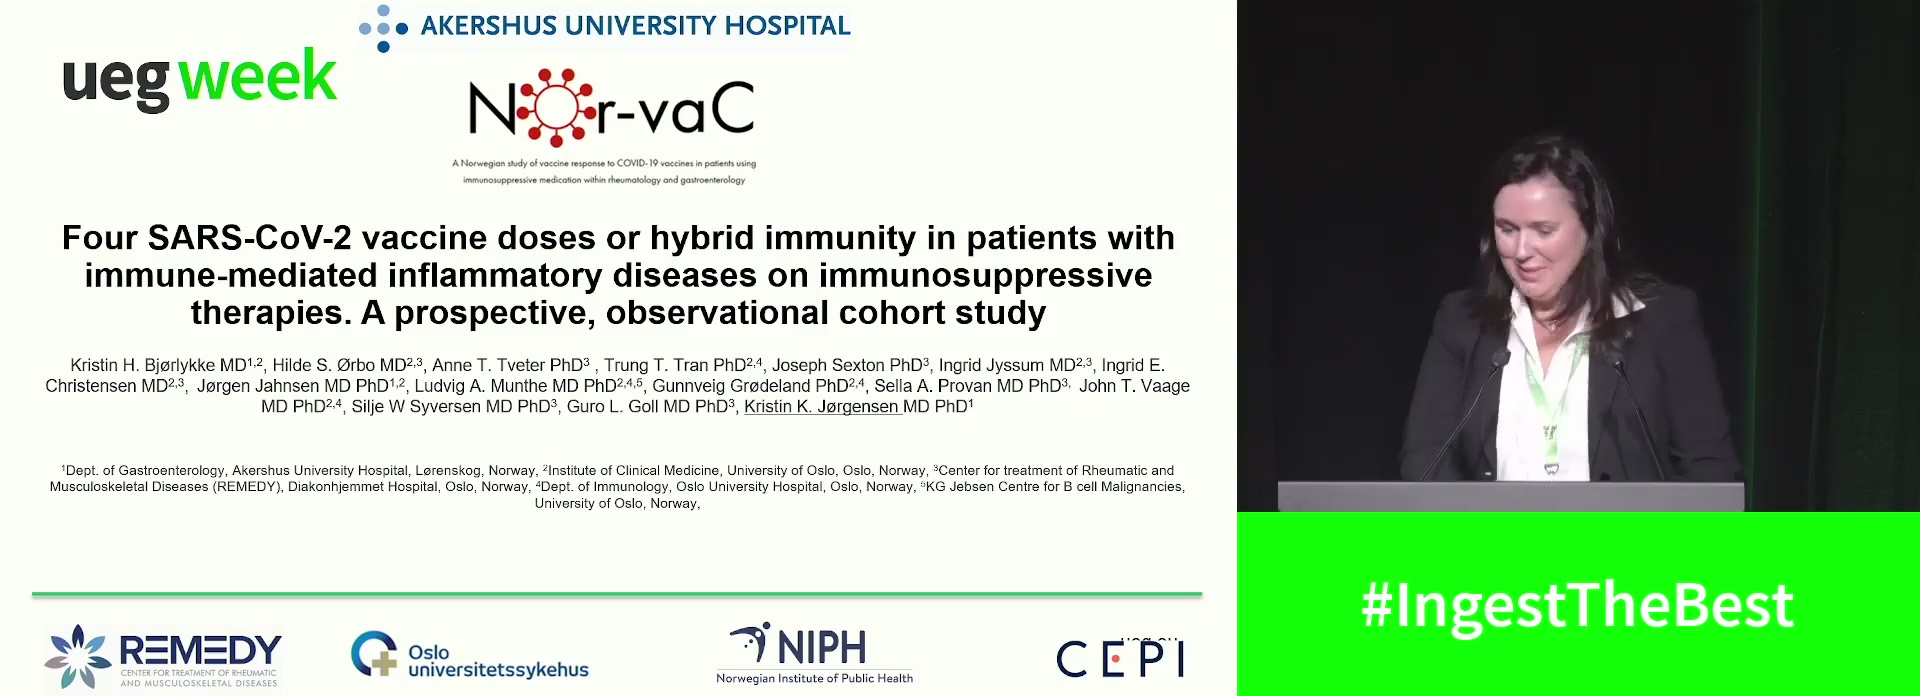 FOUR SARS-COV-2 VACCINE DOSES OR HYBRID IMMUNITY IN PATIENTS WITH IMMUNE-MEDIATED INFLAMMATORY DISEASES ON IMMUNOSUPPRESSIVE THERAPIES. A PROSPECTIVE, OBSERVATIONAL COHORT STUDY